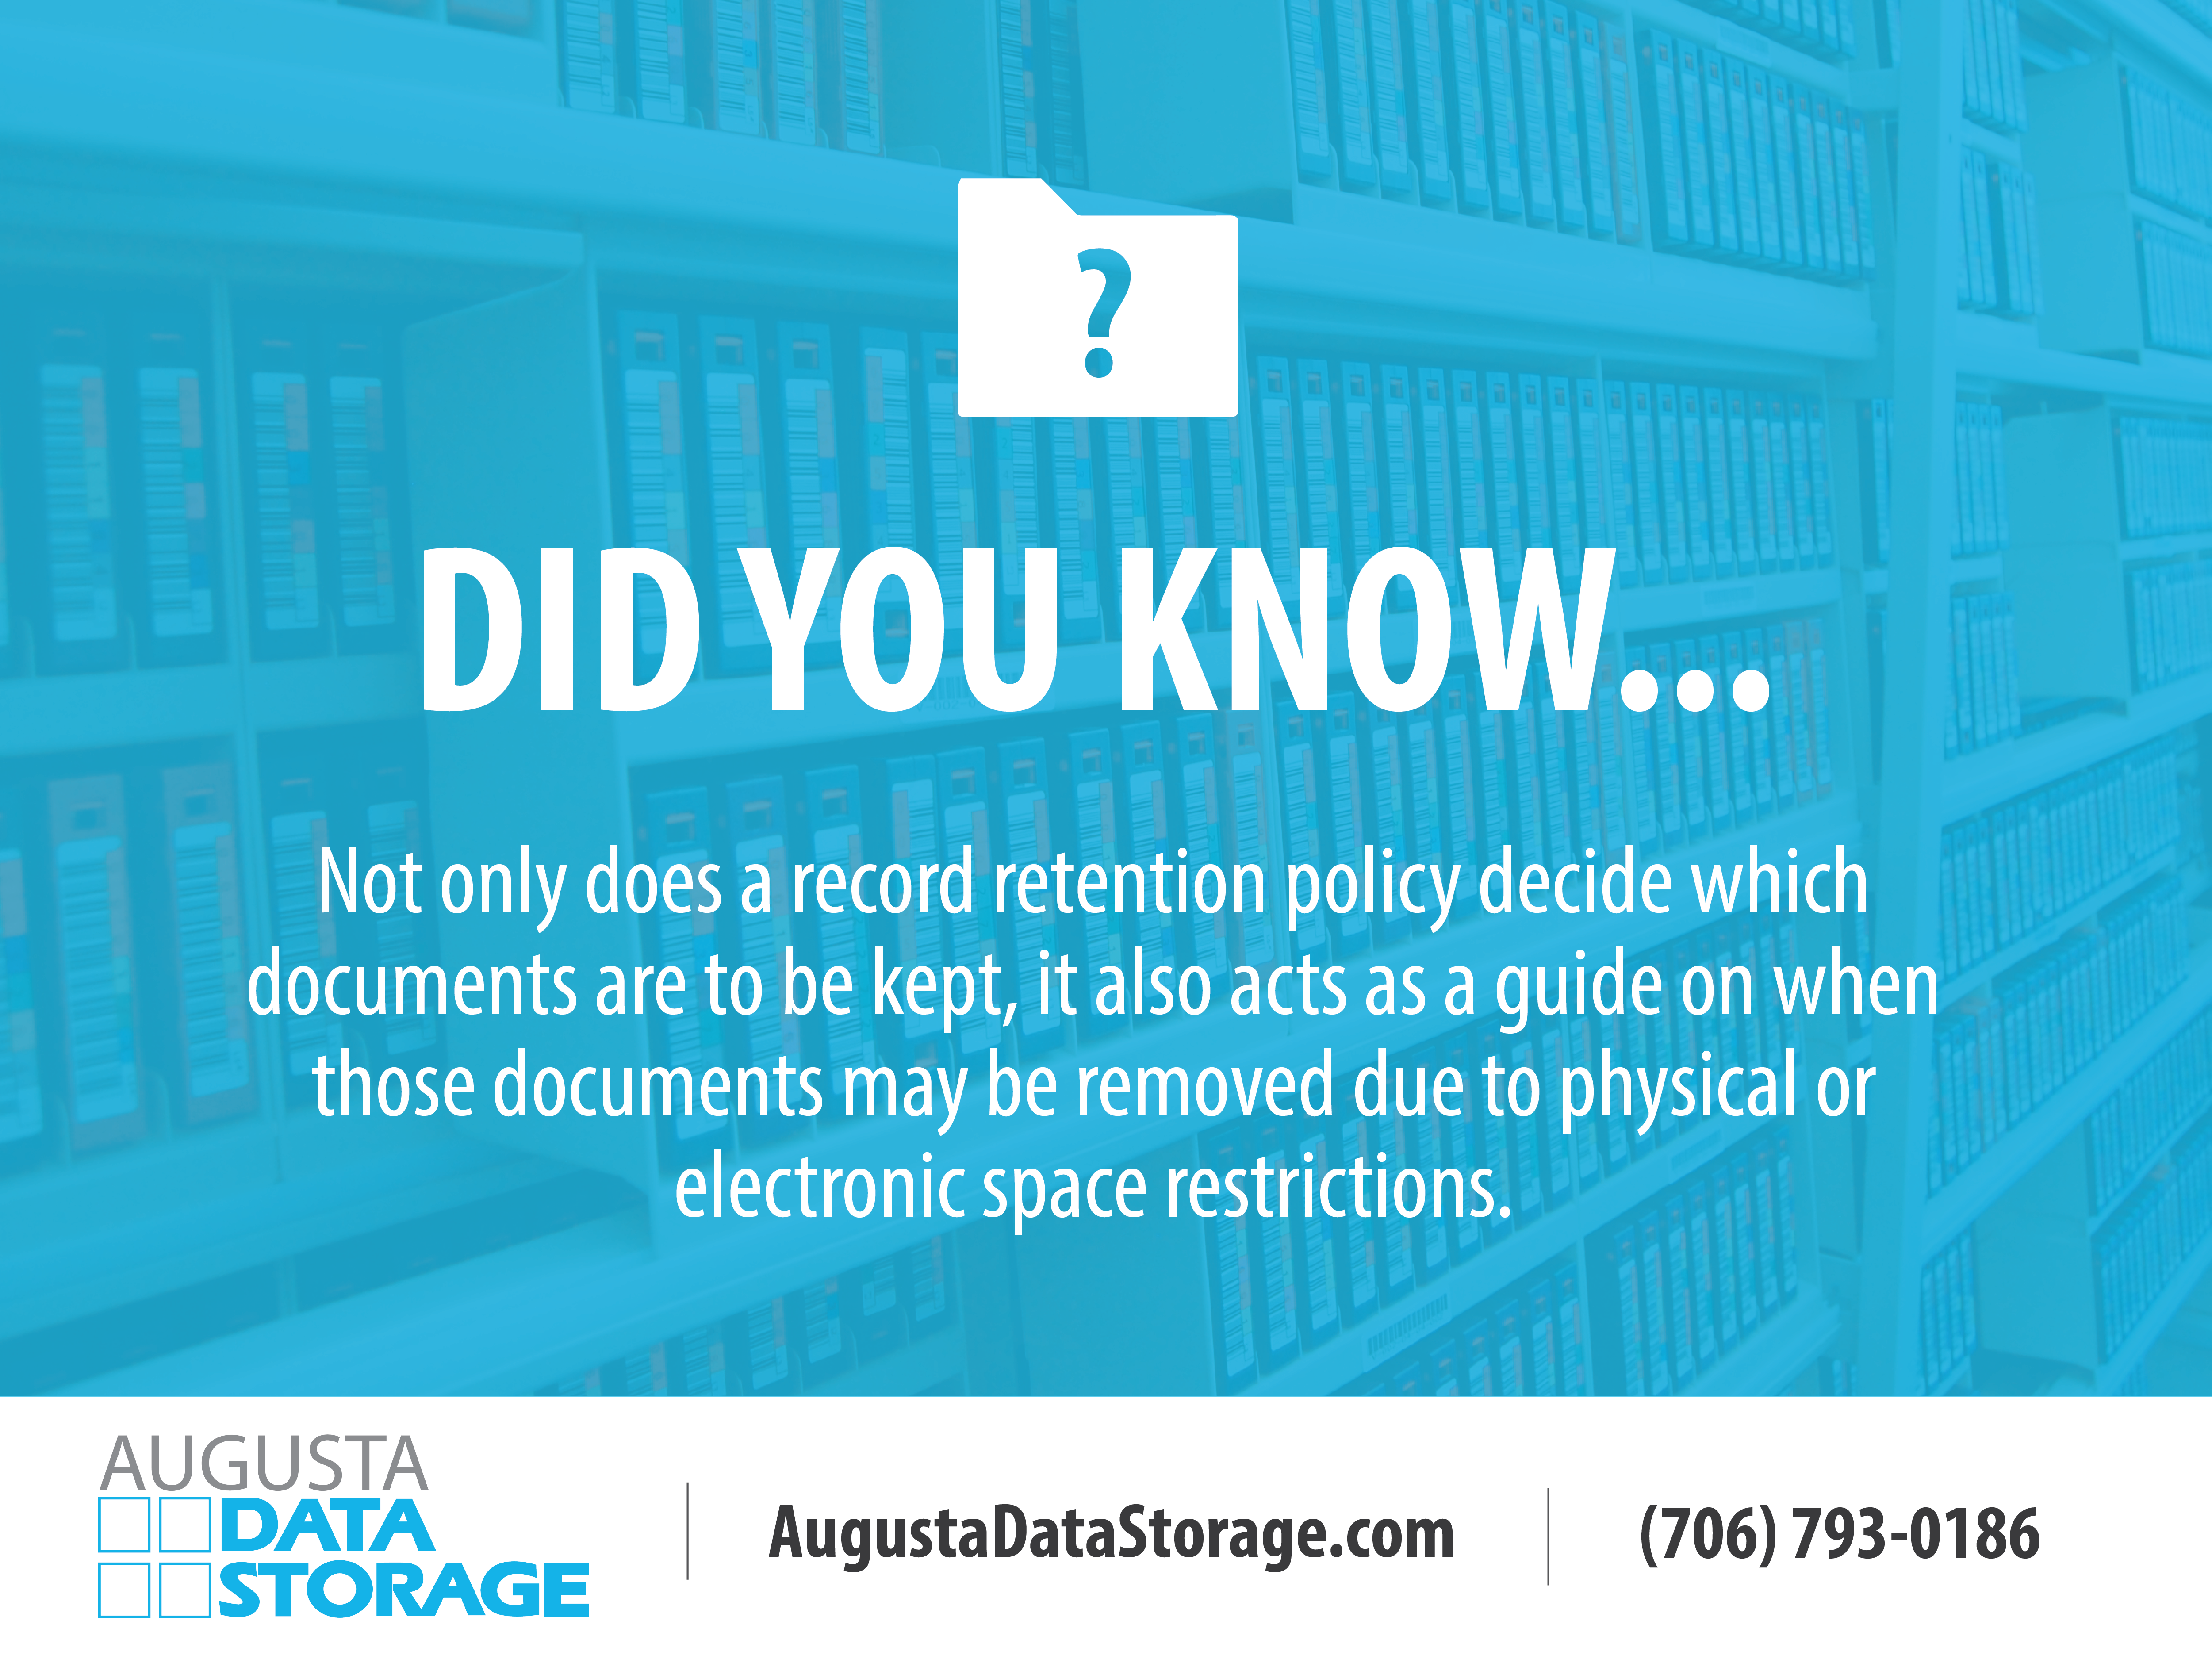 Did you know? Not only does a record retention policy decide which documents are to be kept, it also acts as a guide on when those documents may be removed due to physical or electronic space restrictions.